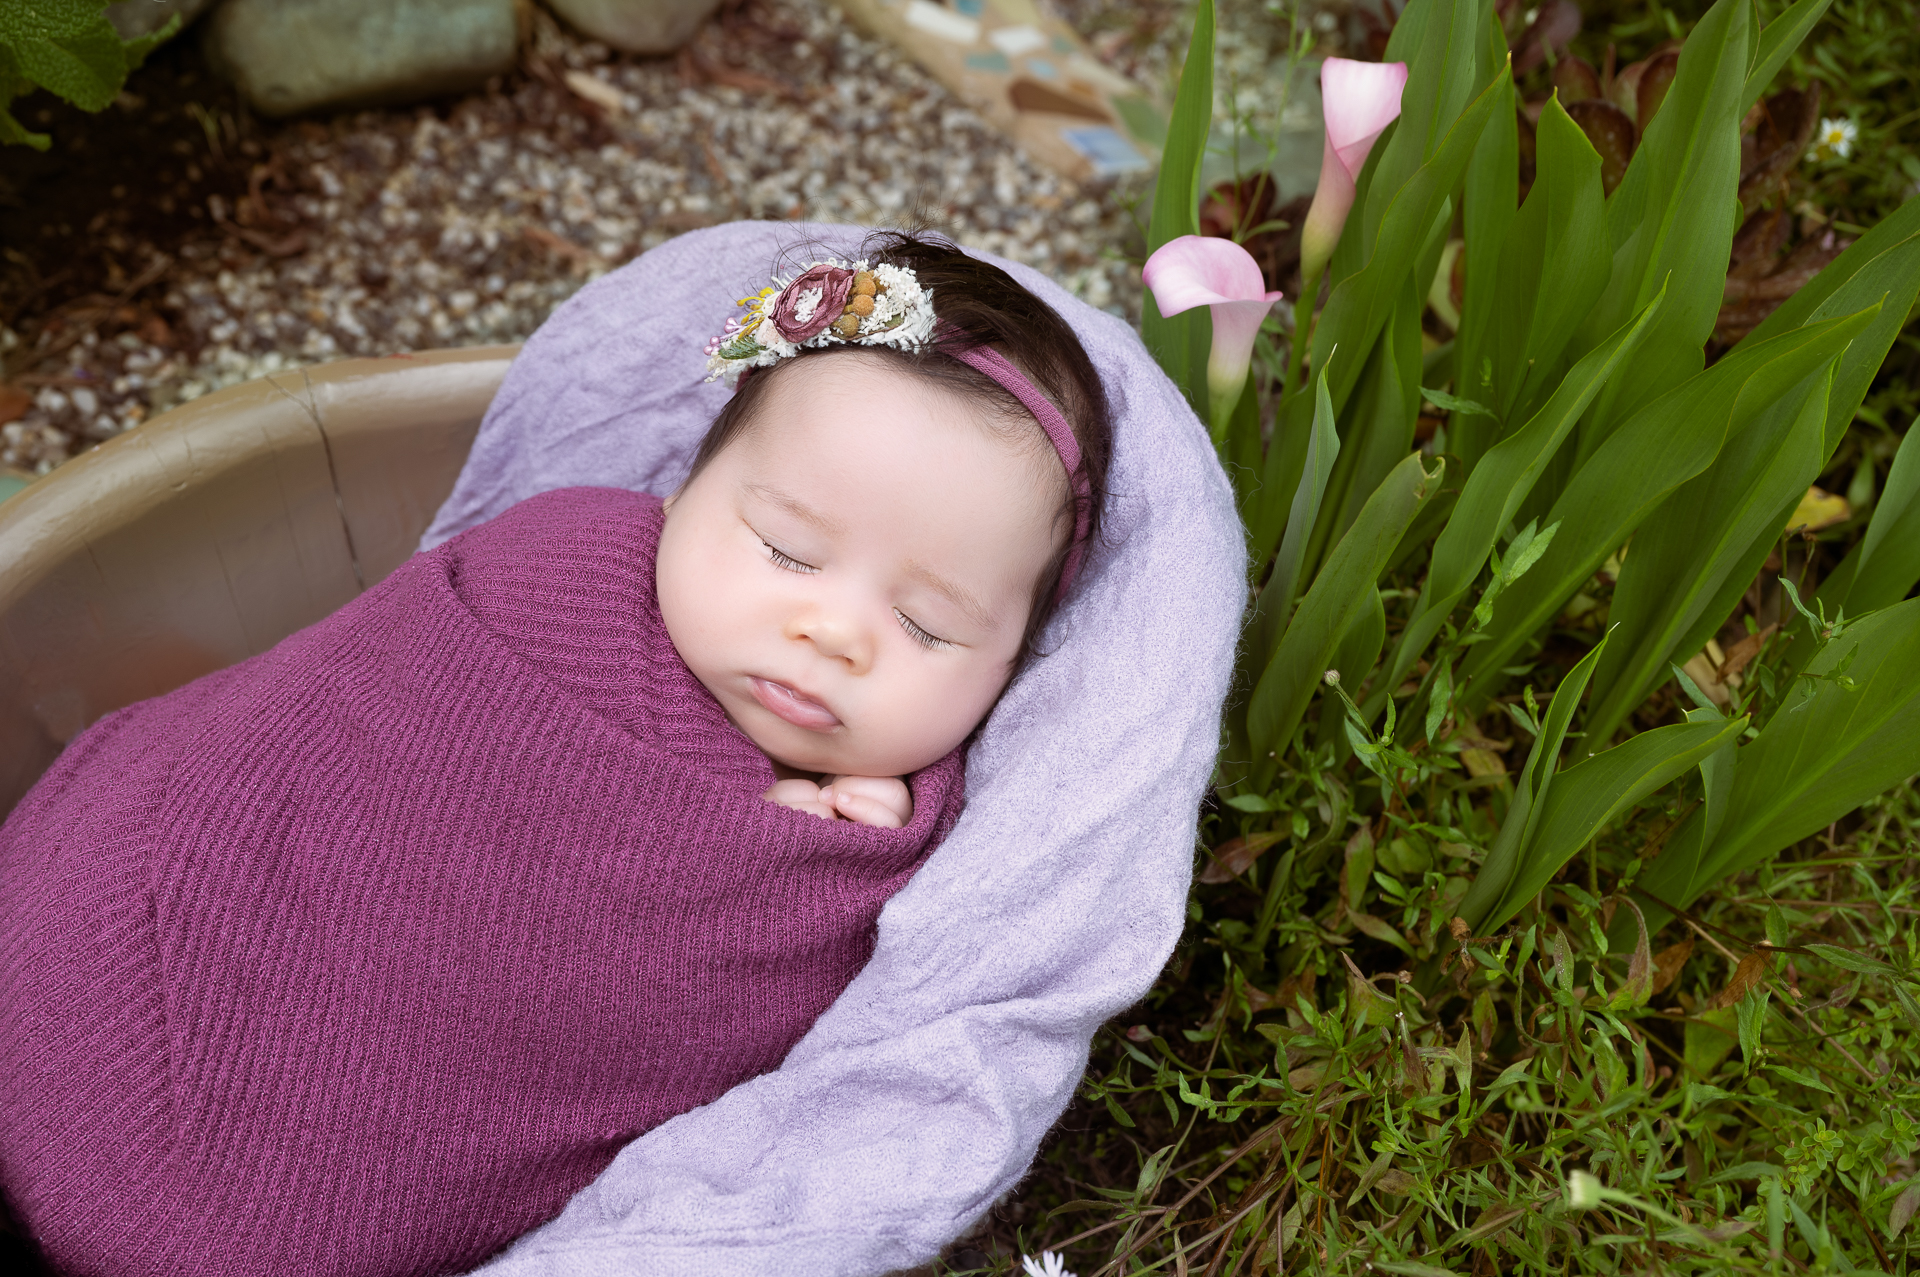 Newborn girl rests on a prop outdoors while wearing a purple wrap. Two pink flowers decorating the scene.